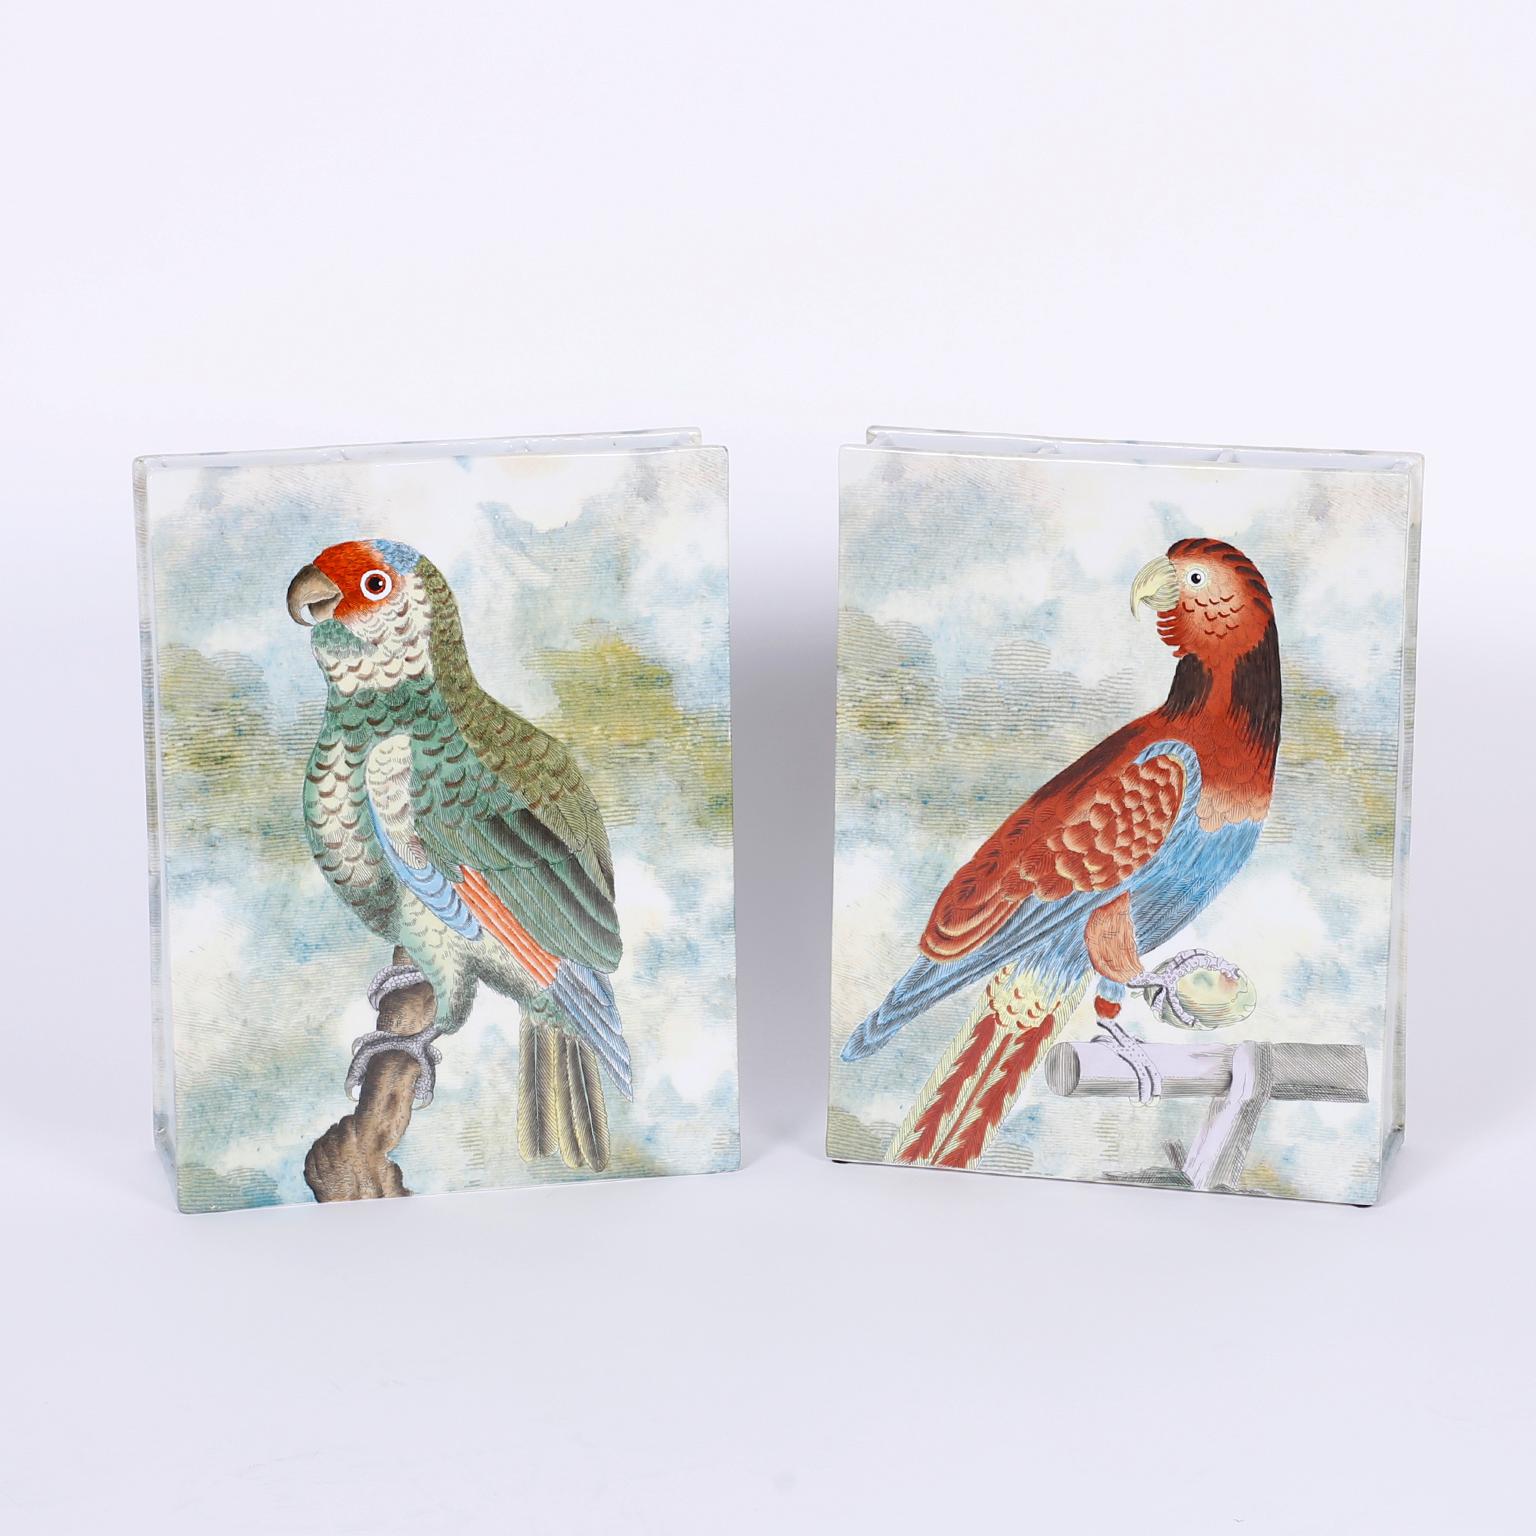 Unusual rectangular porcelain flower vases decorated on both sides with hand painted tropical colored varying parrot species. The opening on the tops is divided into three sections for optimal arrangement opportunities. Signed John Derian on the